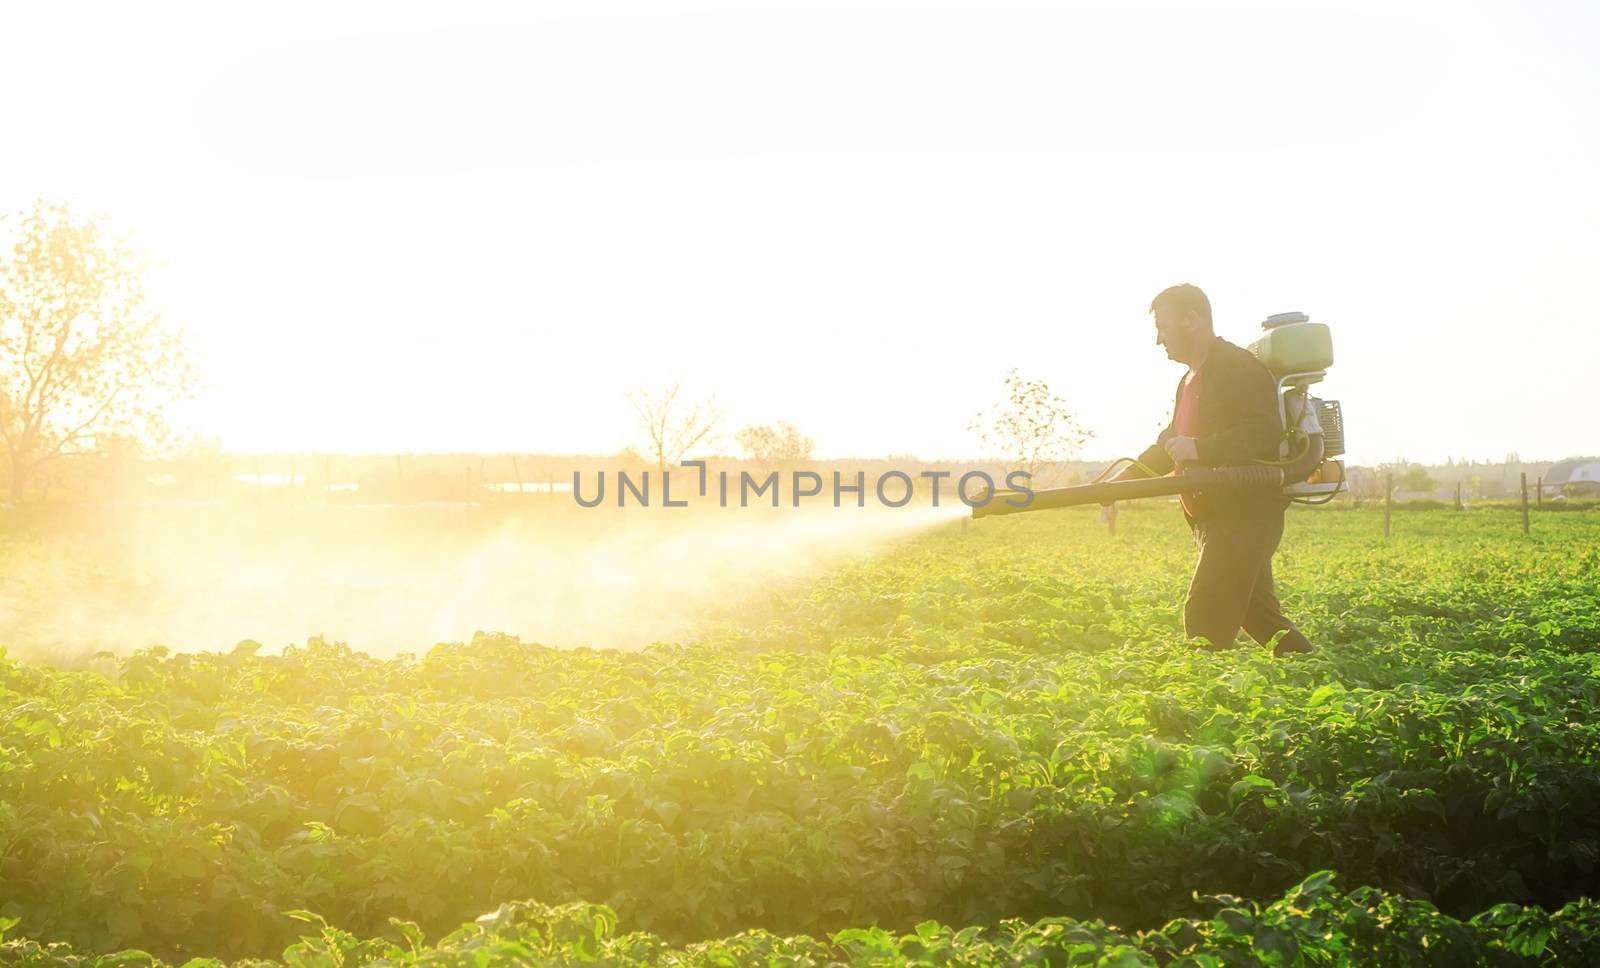 A farmer sprays a solution of copper sulfate on plants of potato bushes. Use chemicals in agriculture. Agriculture and agribusiness, agricultural industry. Fight against fungal infections and insects.